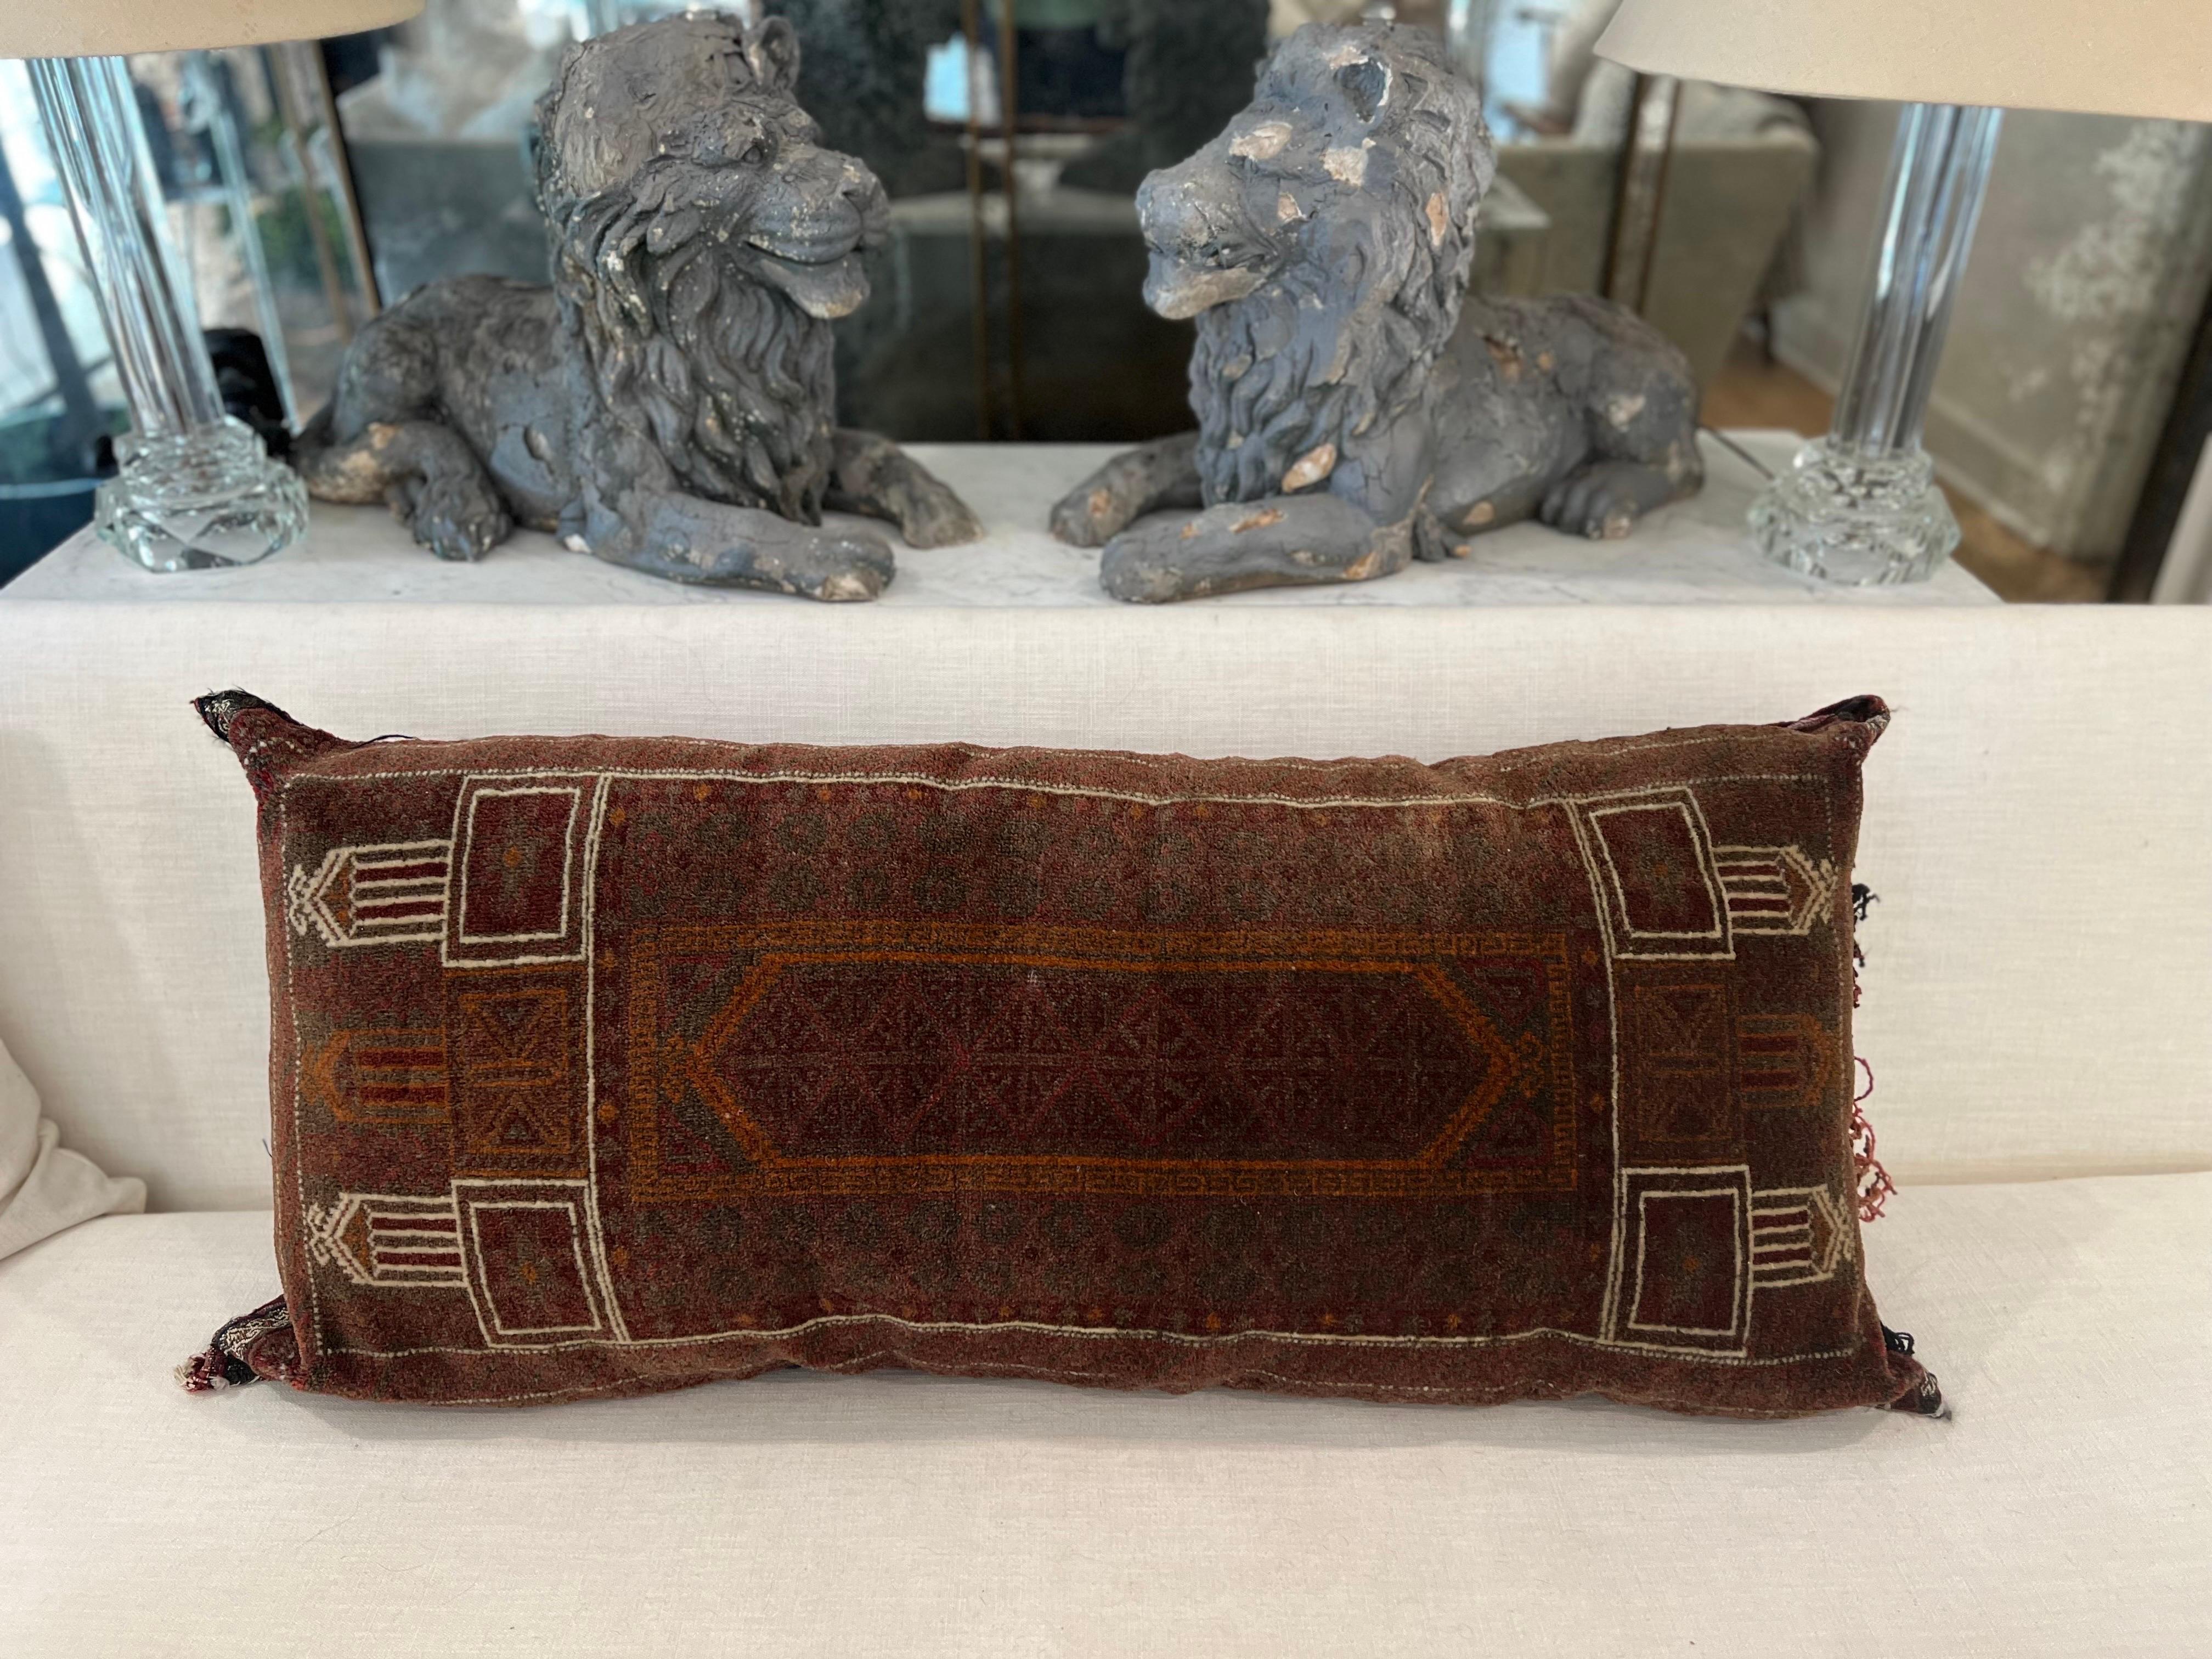 Large Antique Hand-Knotted pillow.  Large enough for center of sofa or floor pillow.  Firm interior that does not lose it's shape.  
See images for condition.